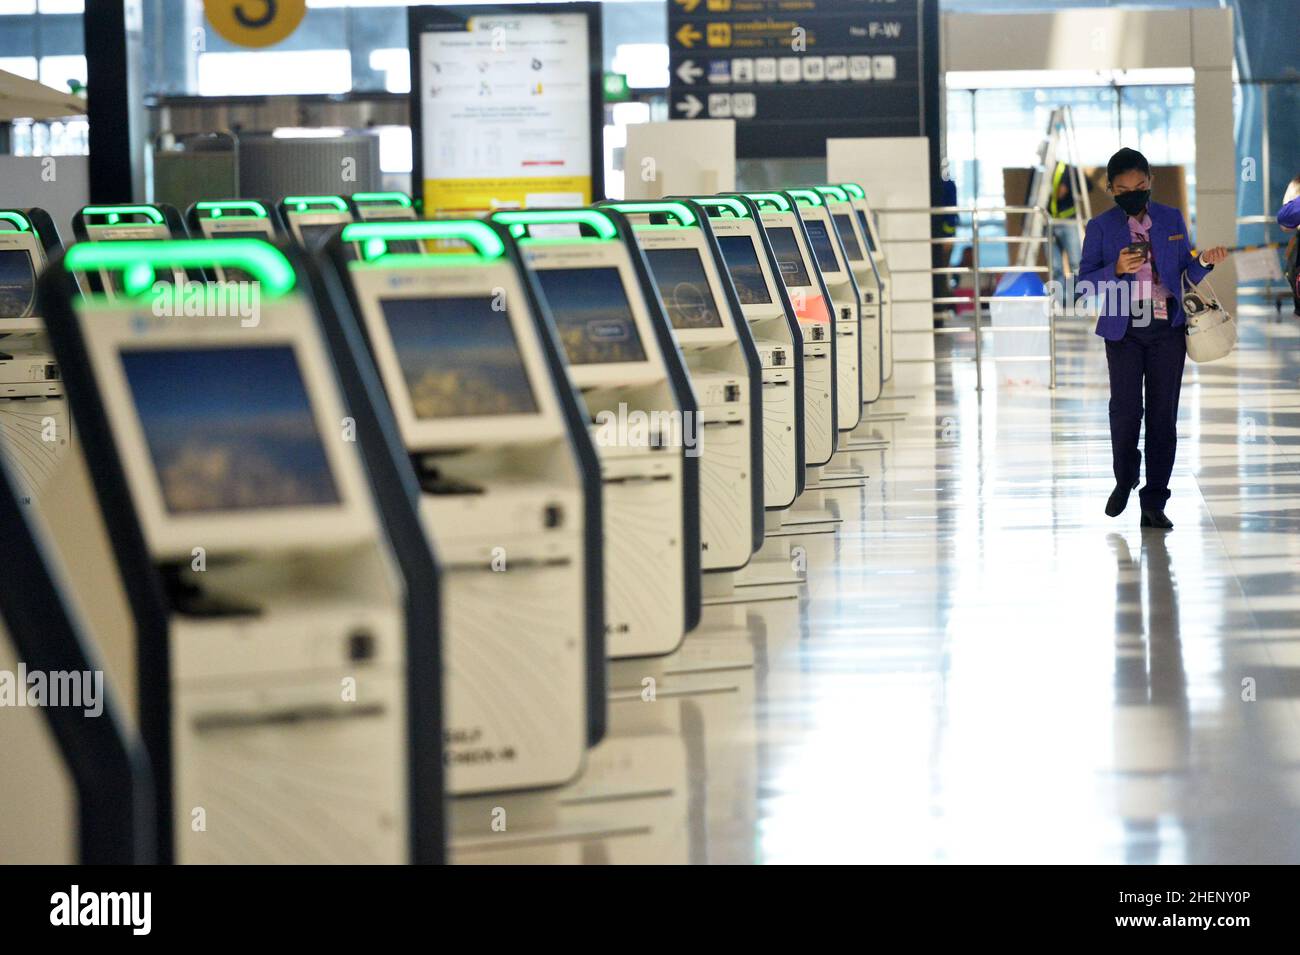 BANGKOK, Jan. 12, 2022 (Xinhua) -- A staff member is seen at the Suvarnabhumi International Airport in Bangkok, Thailand, Jan. 11, 2022. Due to concerns about a new wave of COVID-19 outbreak, Thailand halted the quarantine-free travel scheme from Dec. 22, 2021 and most of its Sandbox Program, which enables quarantine-free entry while requiring visitors to stay in a specific destination for seven days with free movement during their stay, except for the resort island of Phuket. According to the Center for COVID-19 Situation Administration, from Jan. 11 onwards, Thailand will allow Stock Photo